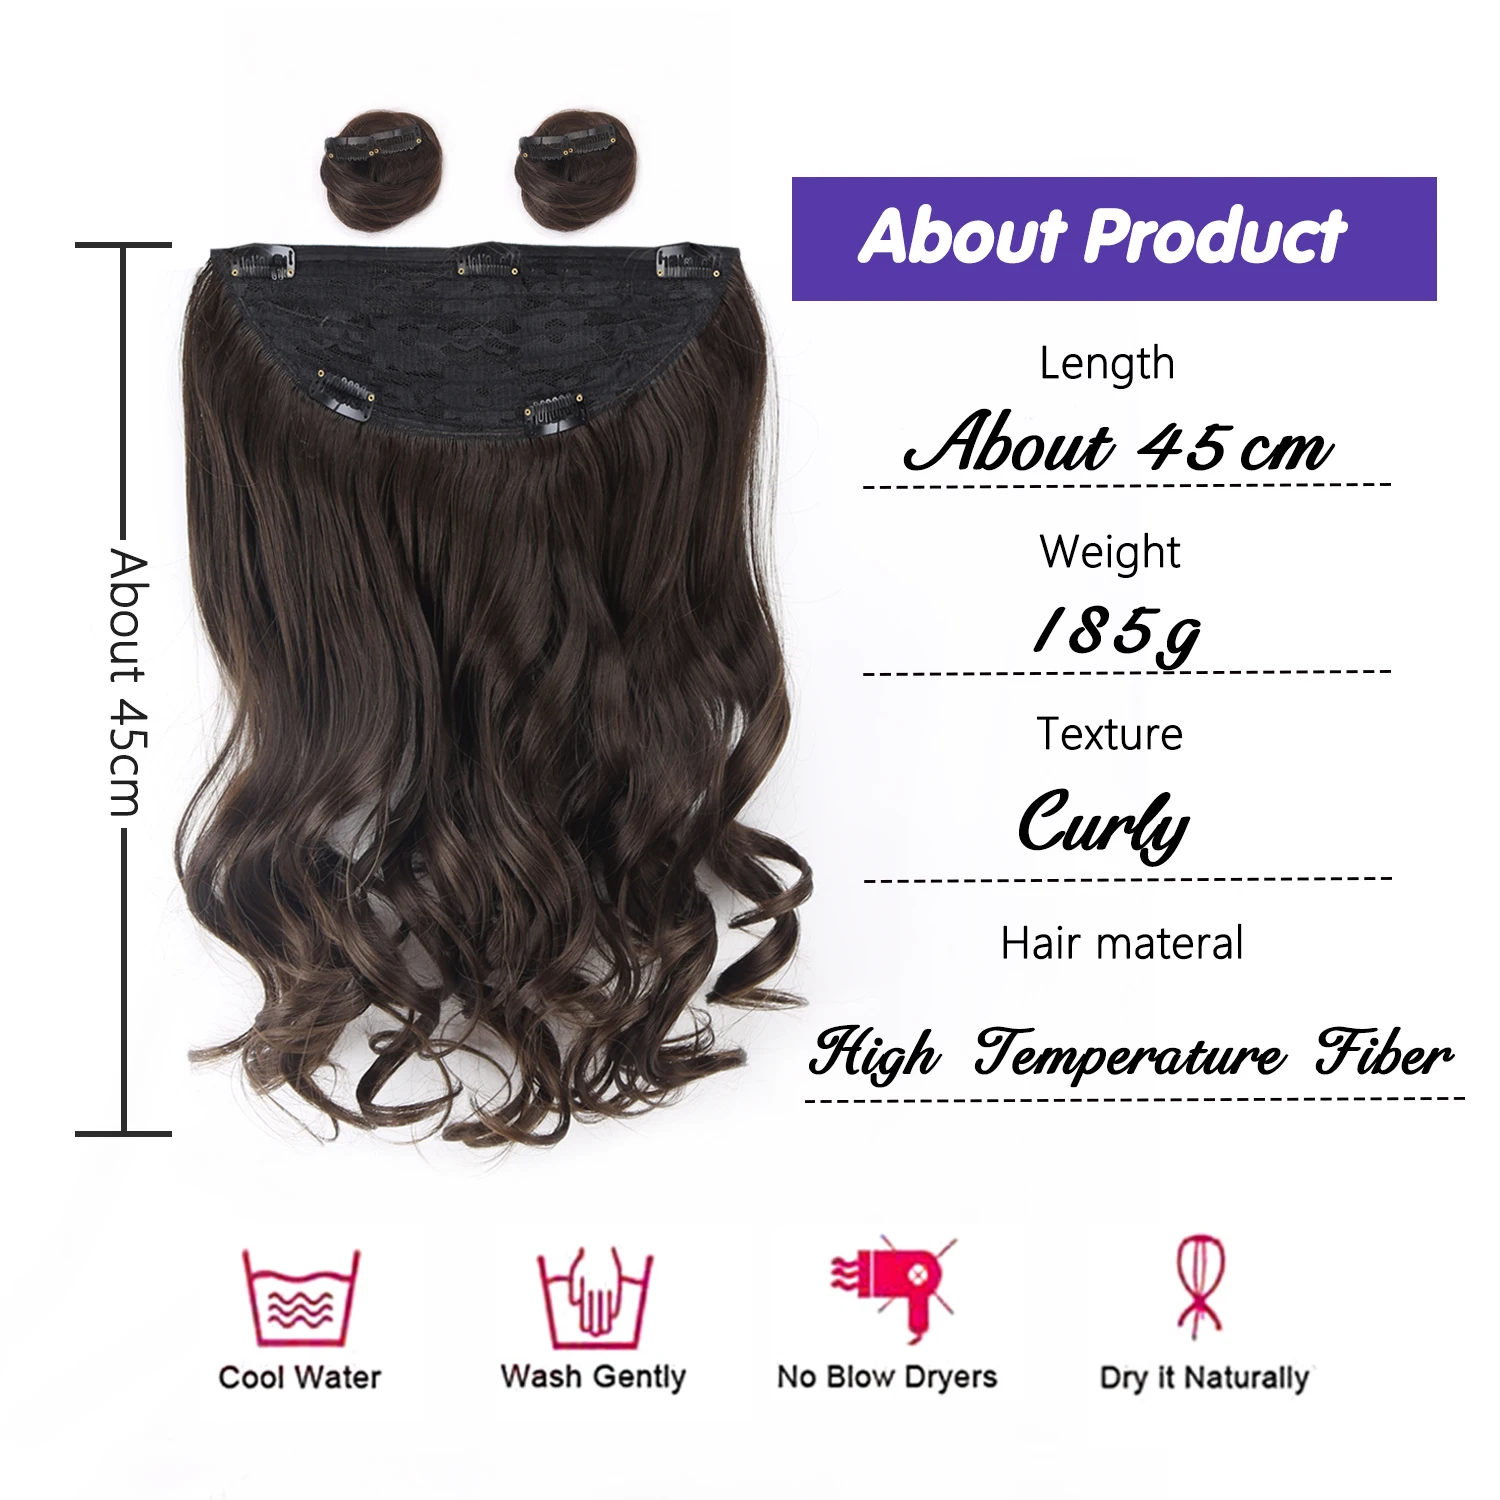 Amir 5 Clip In Hair Extension Heat Resistant Fake Hairpieces Long Wavy Hairstyles Synthetic Clip On Hair Extensions 18Inches